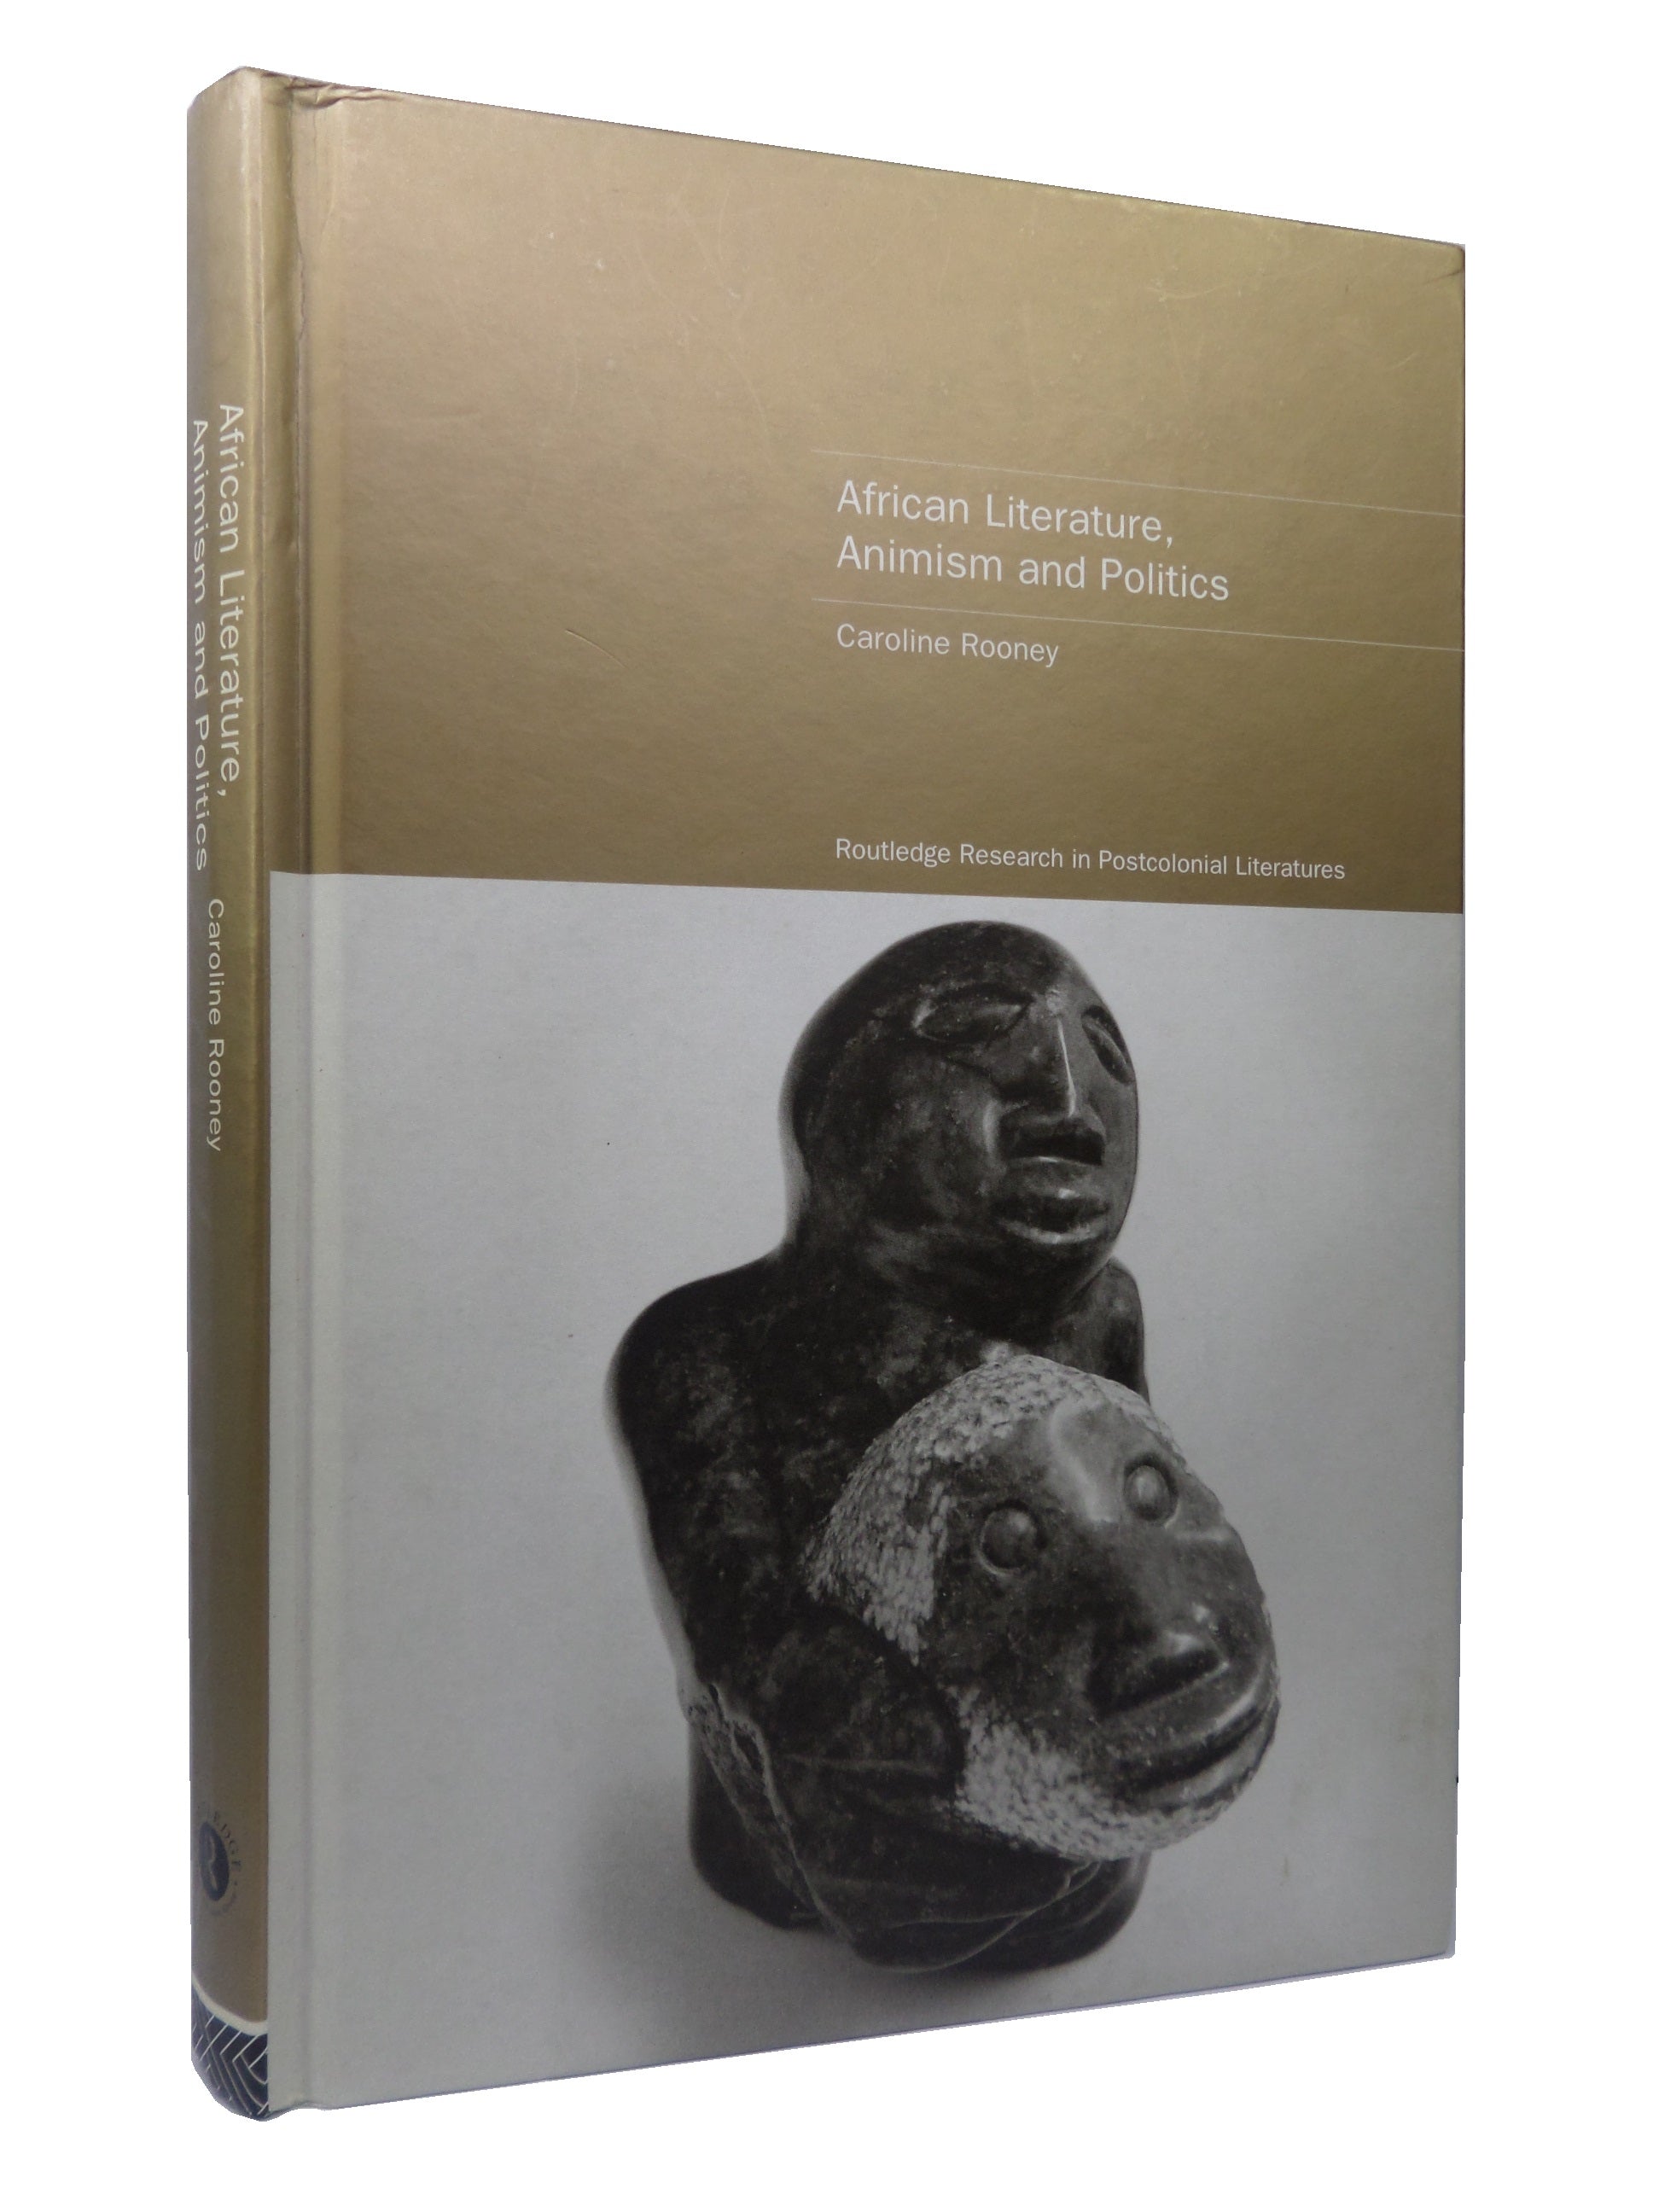 AFRICAN LITERATURE, ANIMISM AND POLITICS BY CAROLINE ROONEY 2000 HARDCOVER